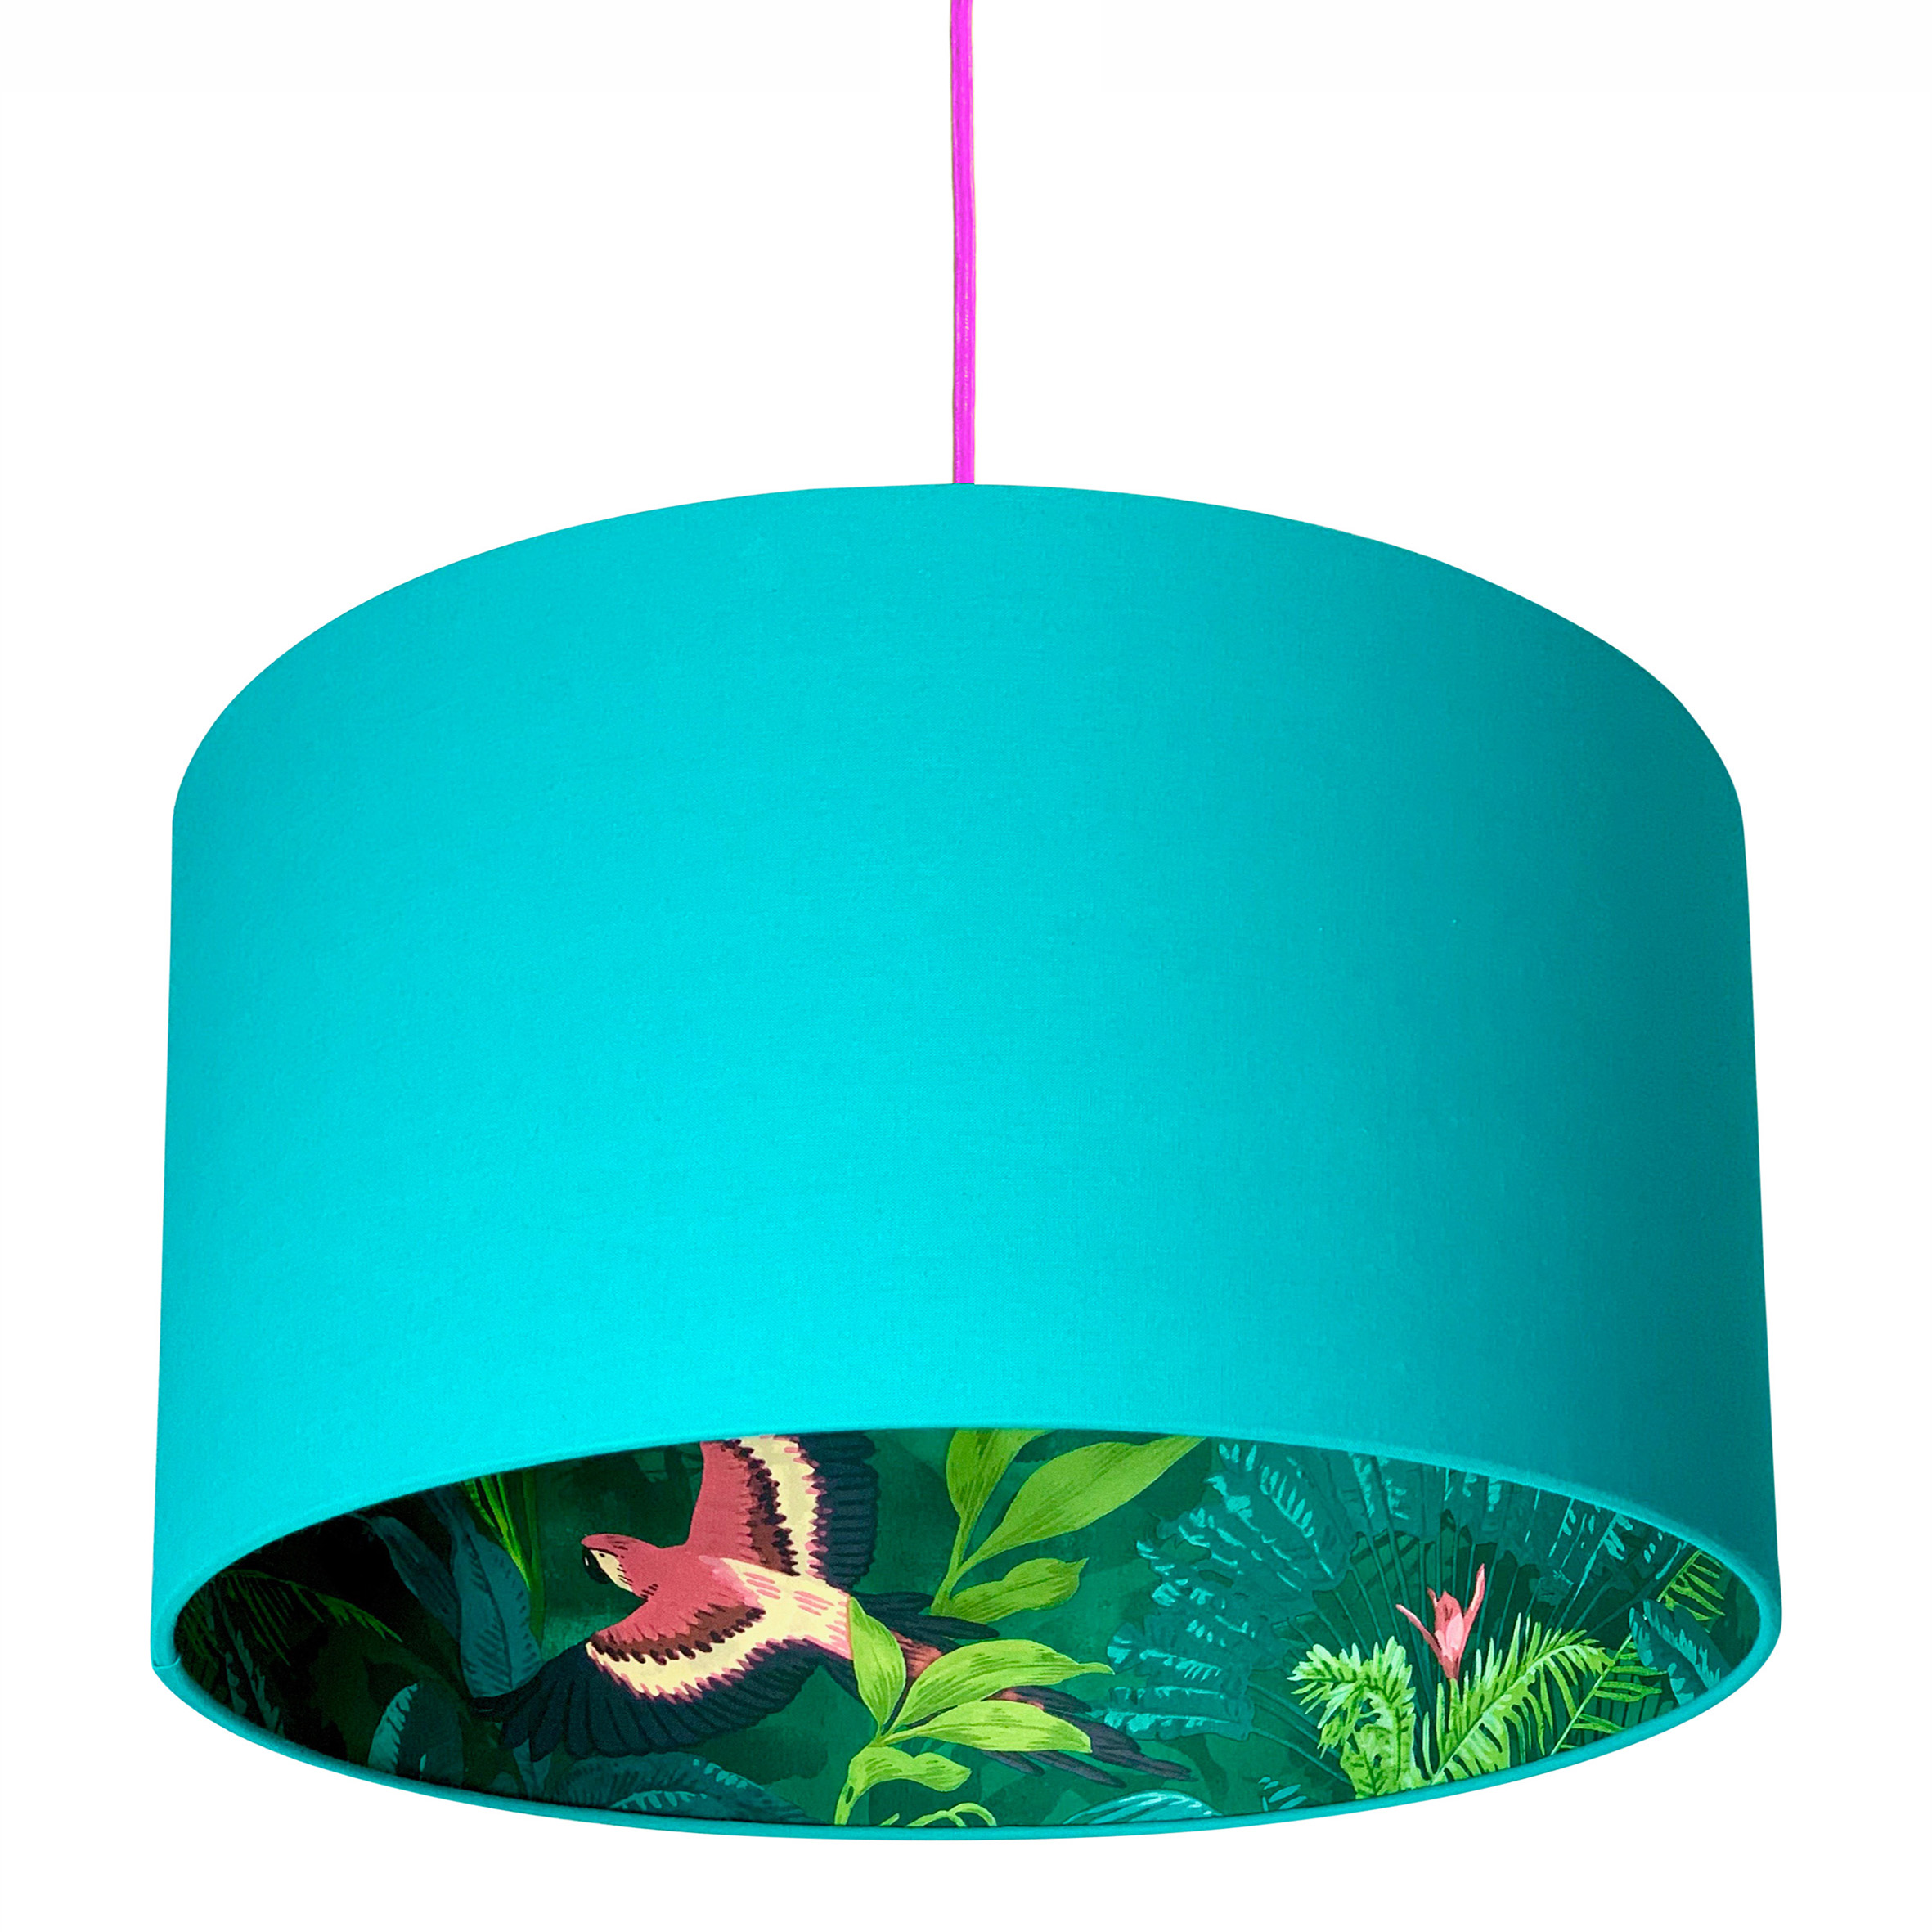 Bird Of Paradise Silhouette Lampshade, Silhouette Lampshade